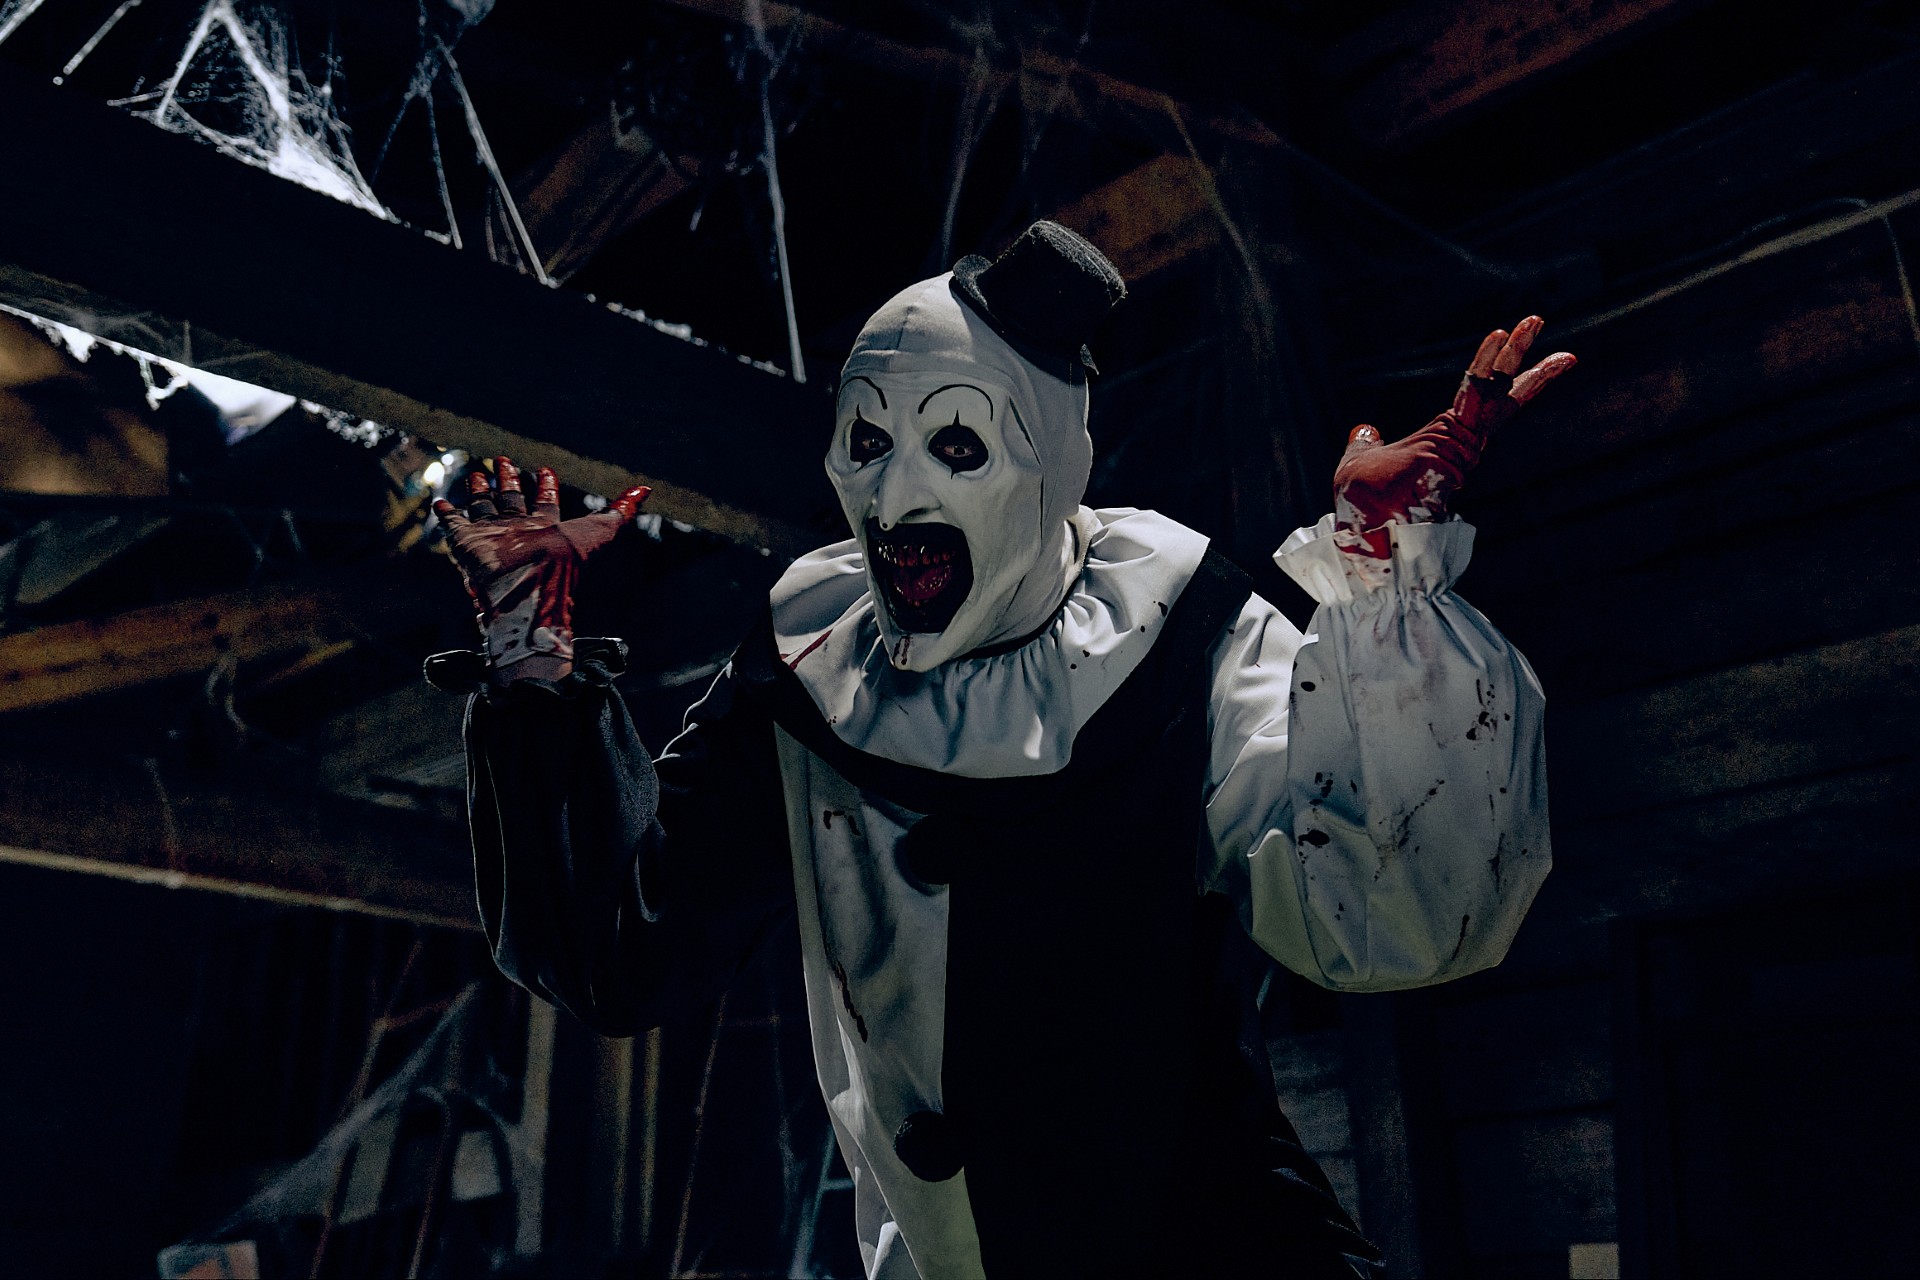 TERRIFIER 3 Photo Courtesy of Courtesy of Dark Age Cinema and Bloody Disgusting. Photog: Jesse Korman